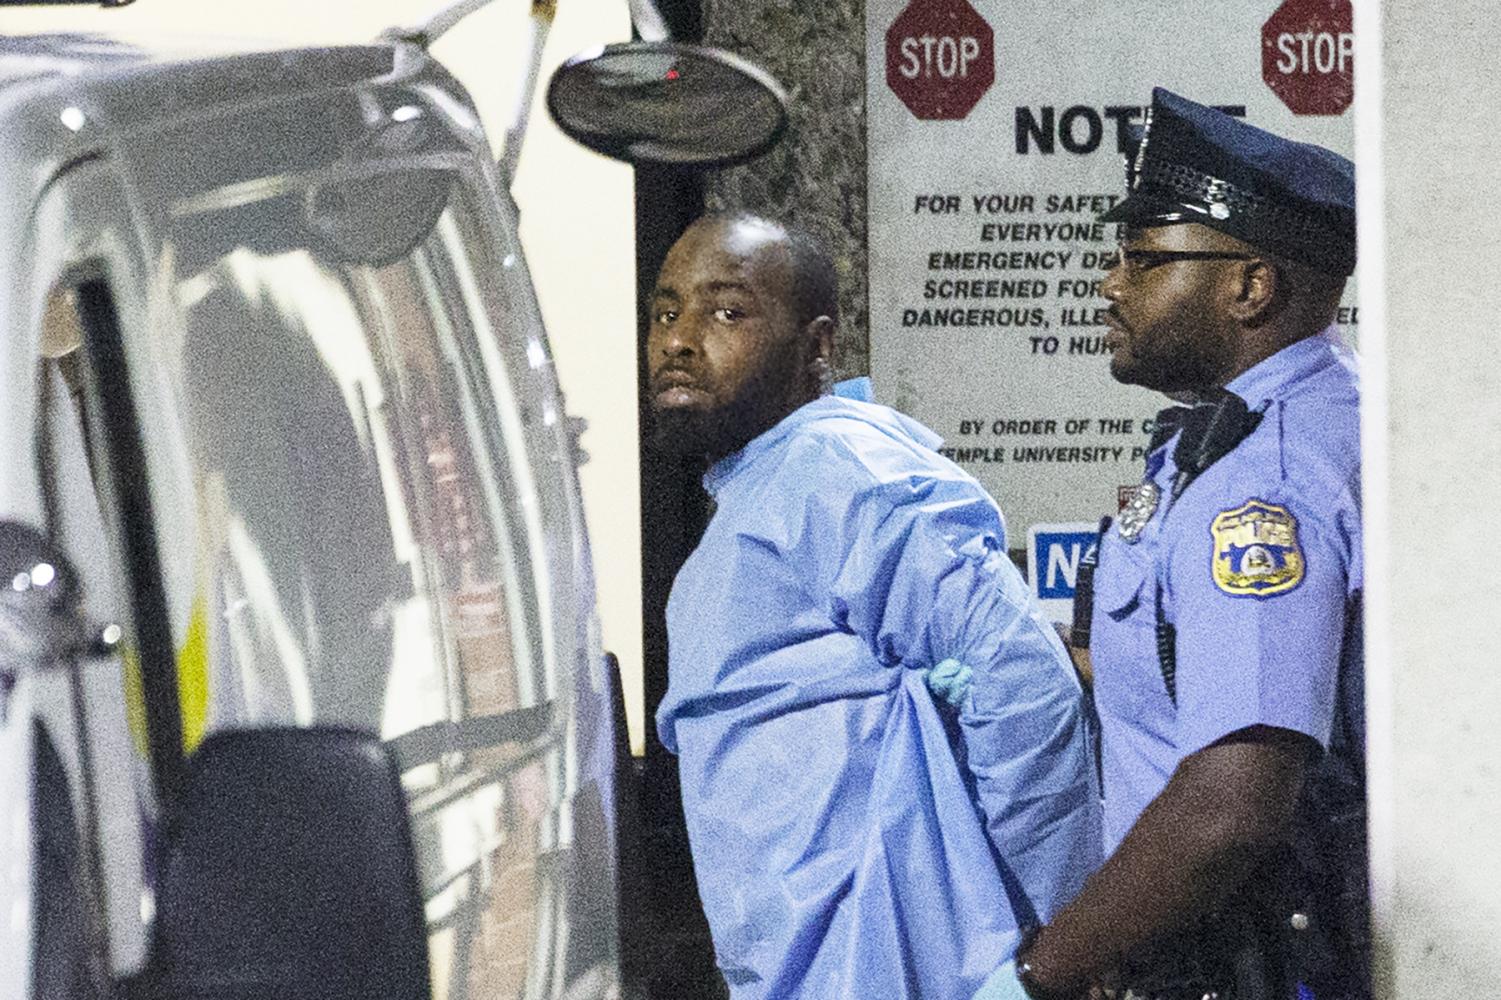 Maurice+Hill%2C+a+Philadelphia+gunman+with+a+long+criminal+history%2C+wounded+six+police+officers+that+led+to+a+seven+hour+standoff